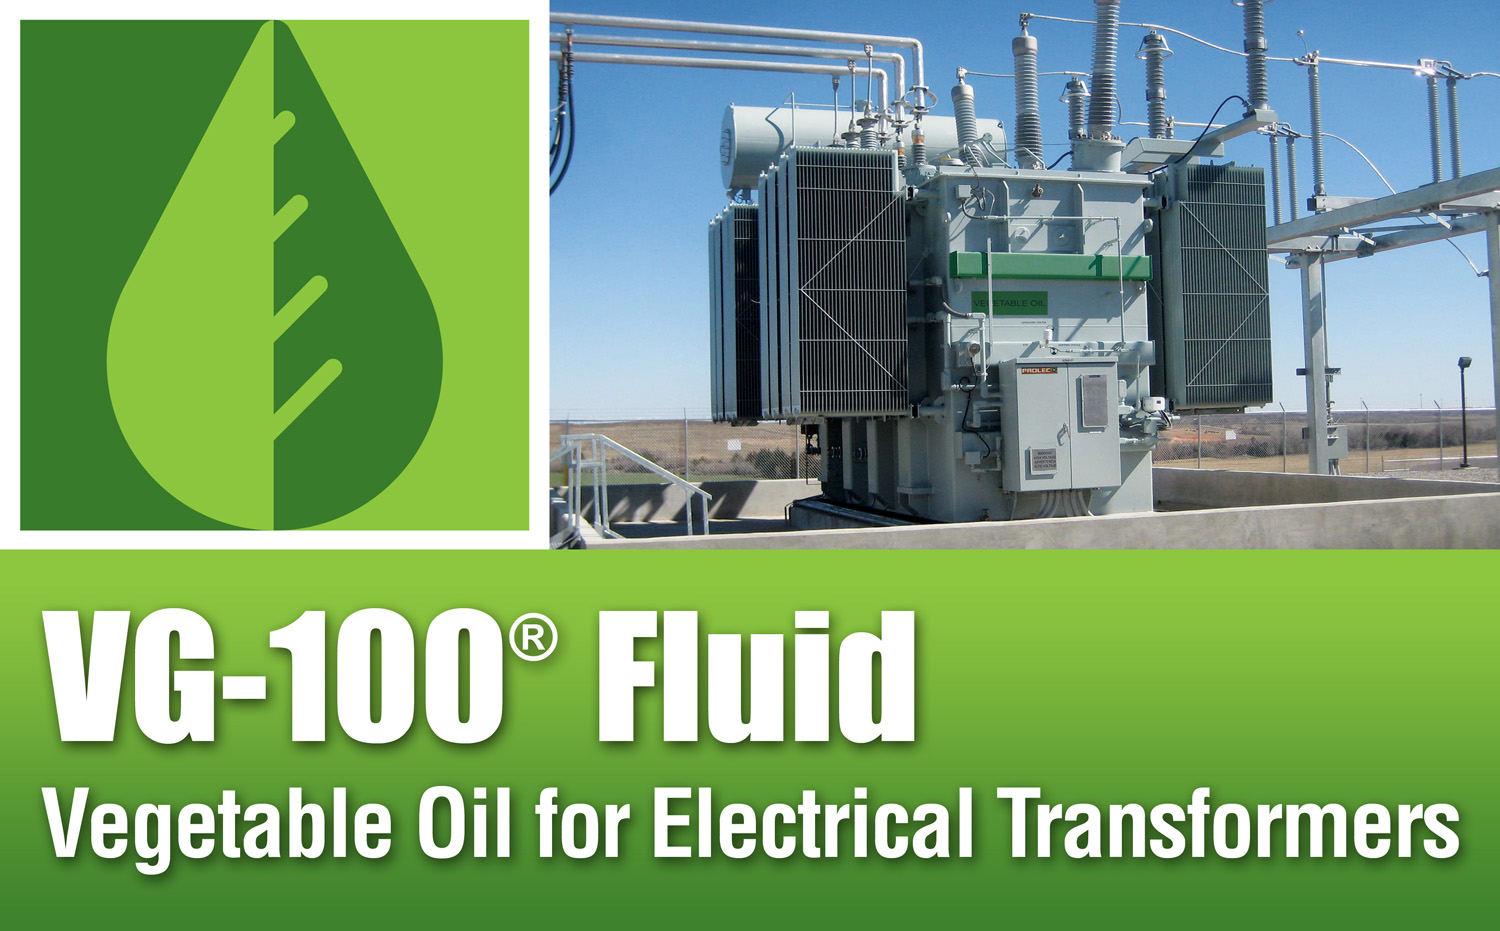 VG-100 Fluid – Vegetable Oil for Electrical Transformers